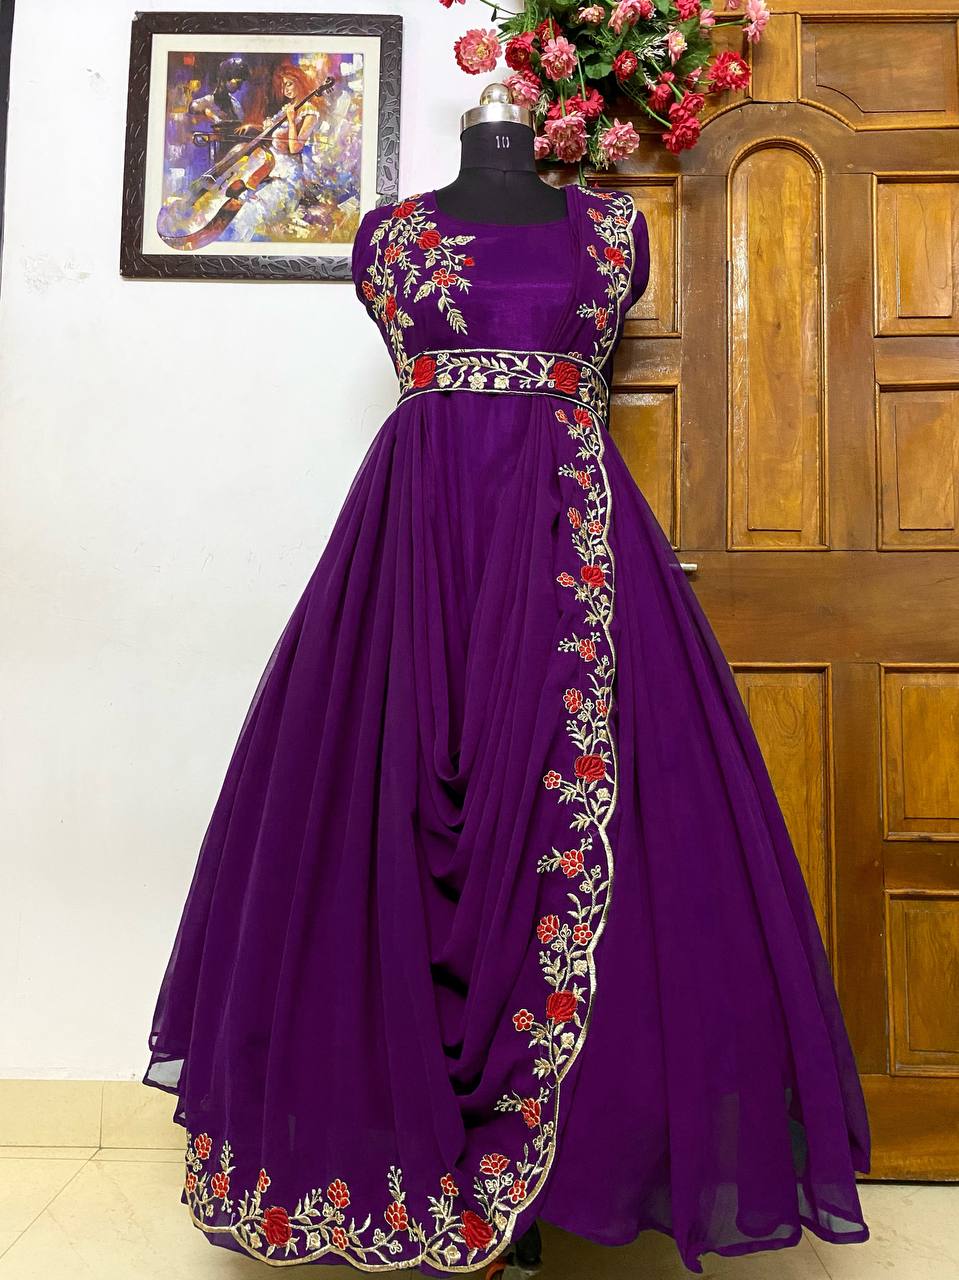 Party Wear Stylish Georgette Embroidered Cross Designer Gown with Belt